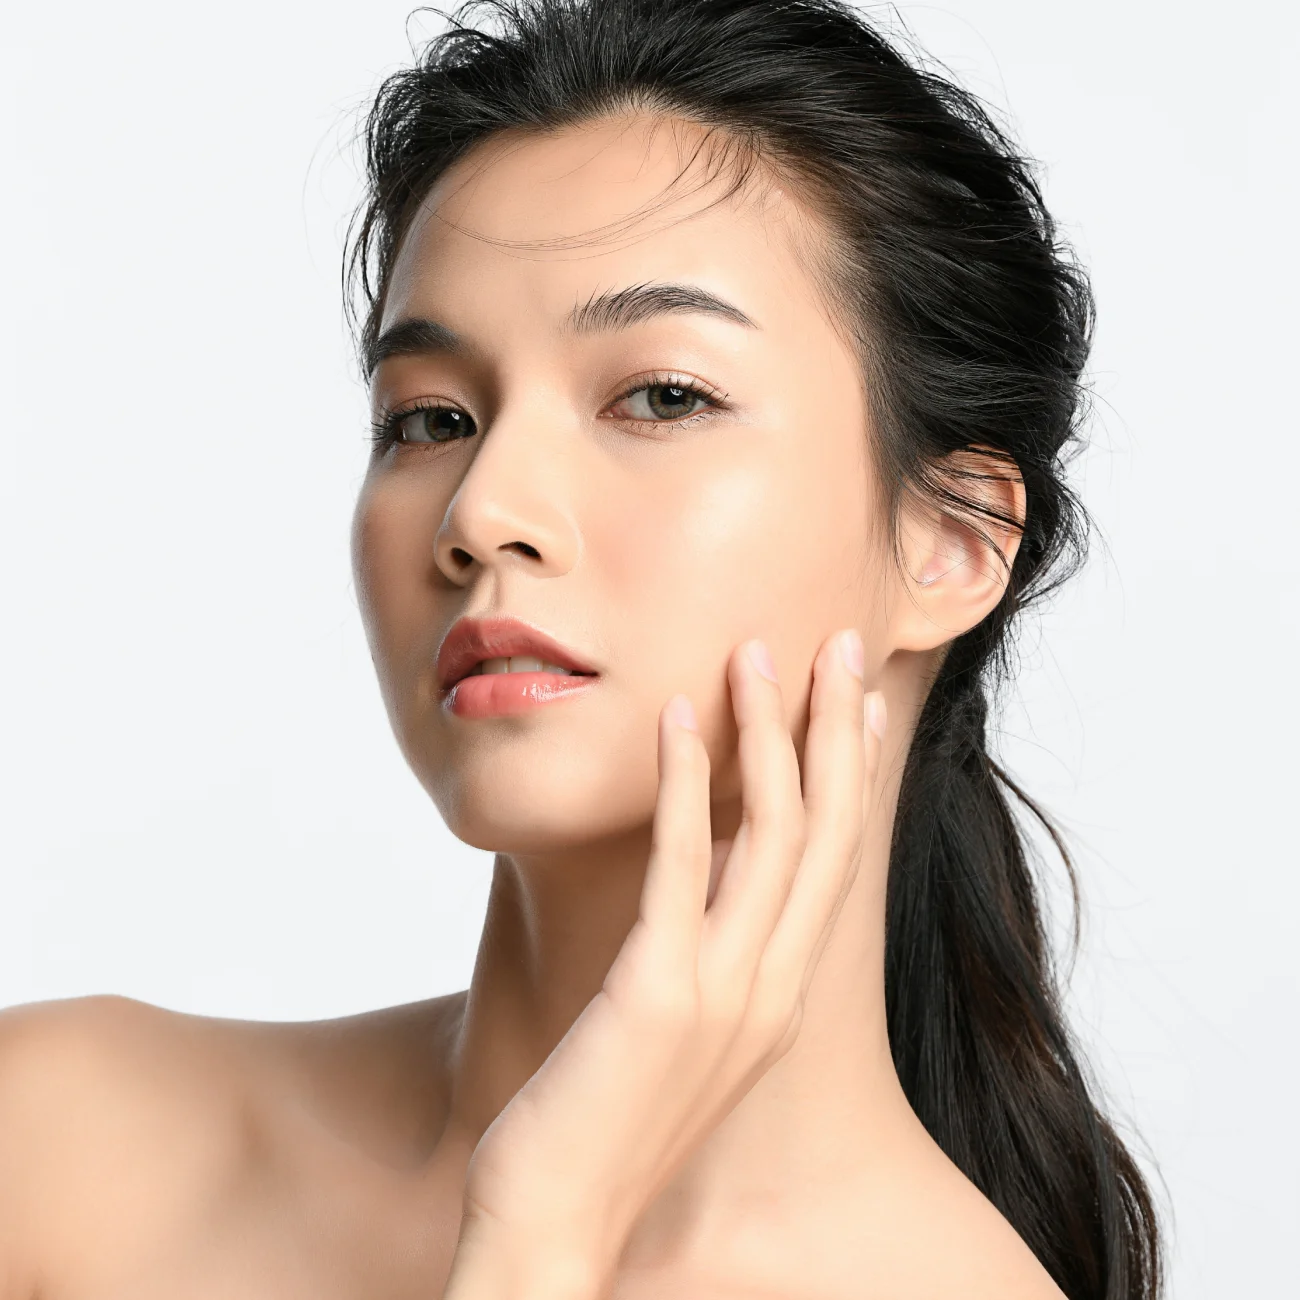 Beautiful young asian woman with clean fresh skin on white background